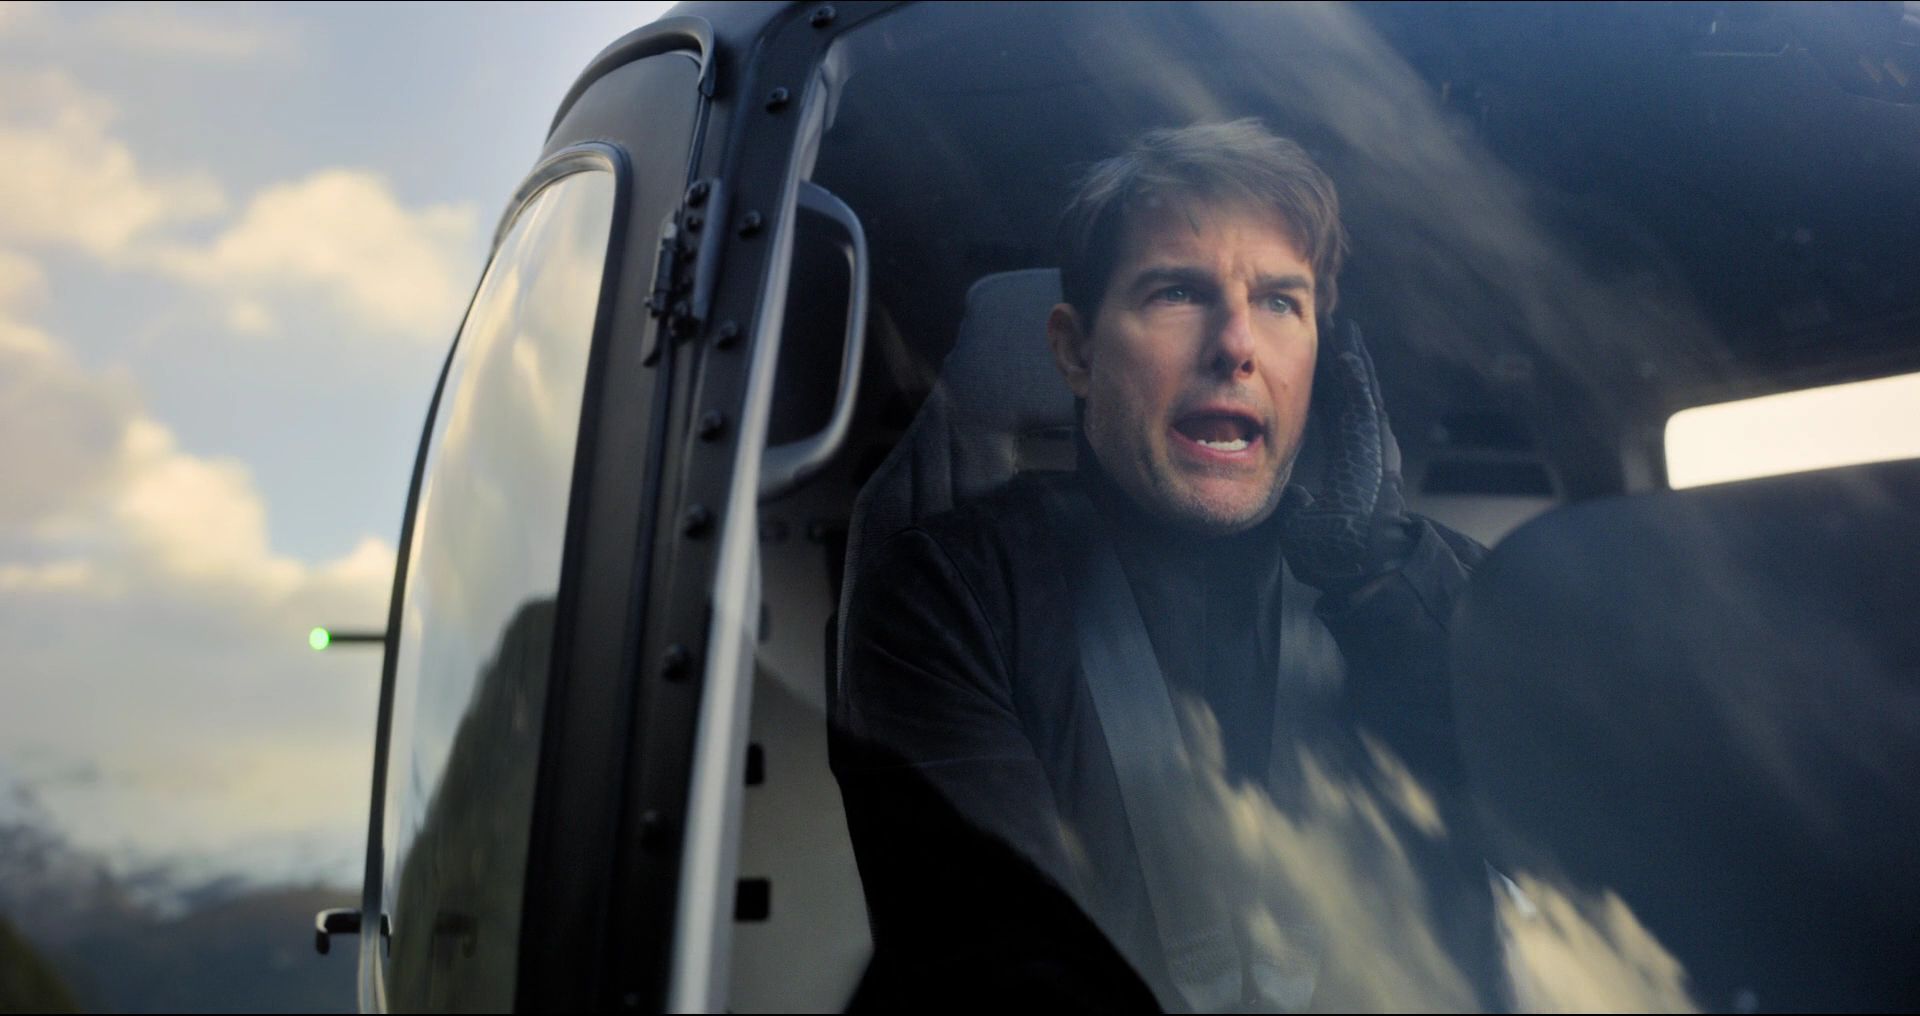 Mission-Impossible-Fallout-3424.jpg